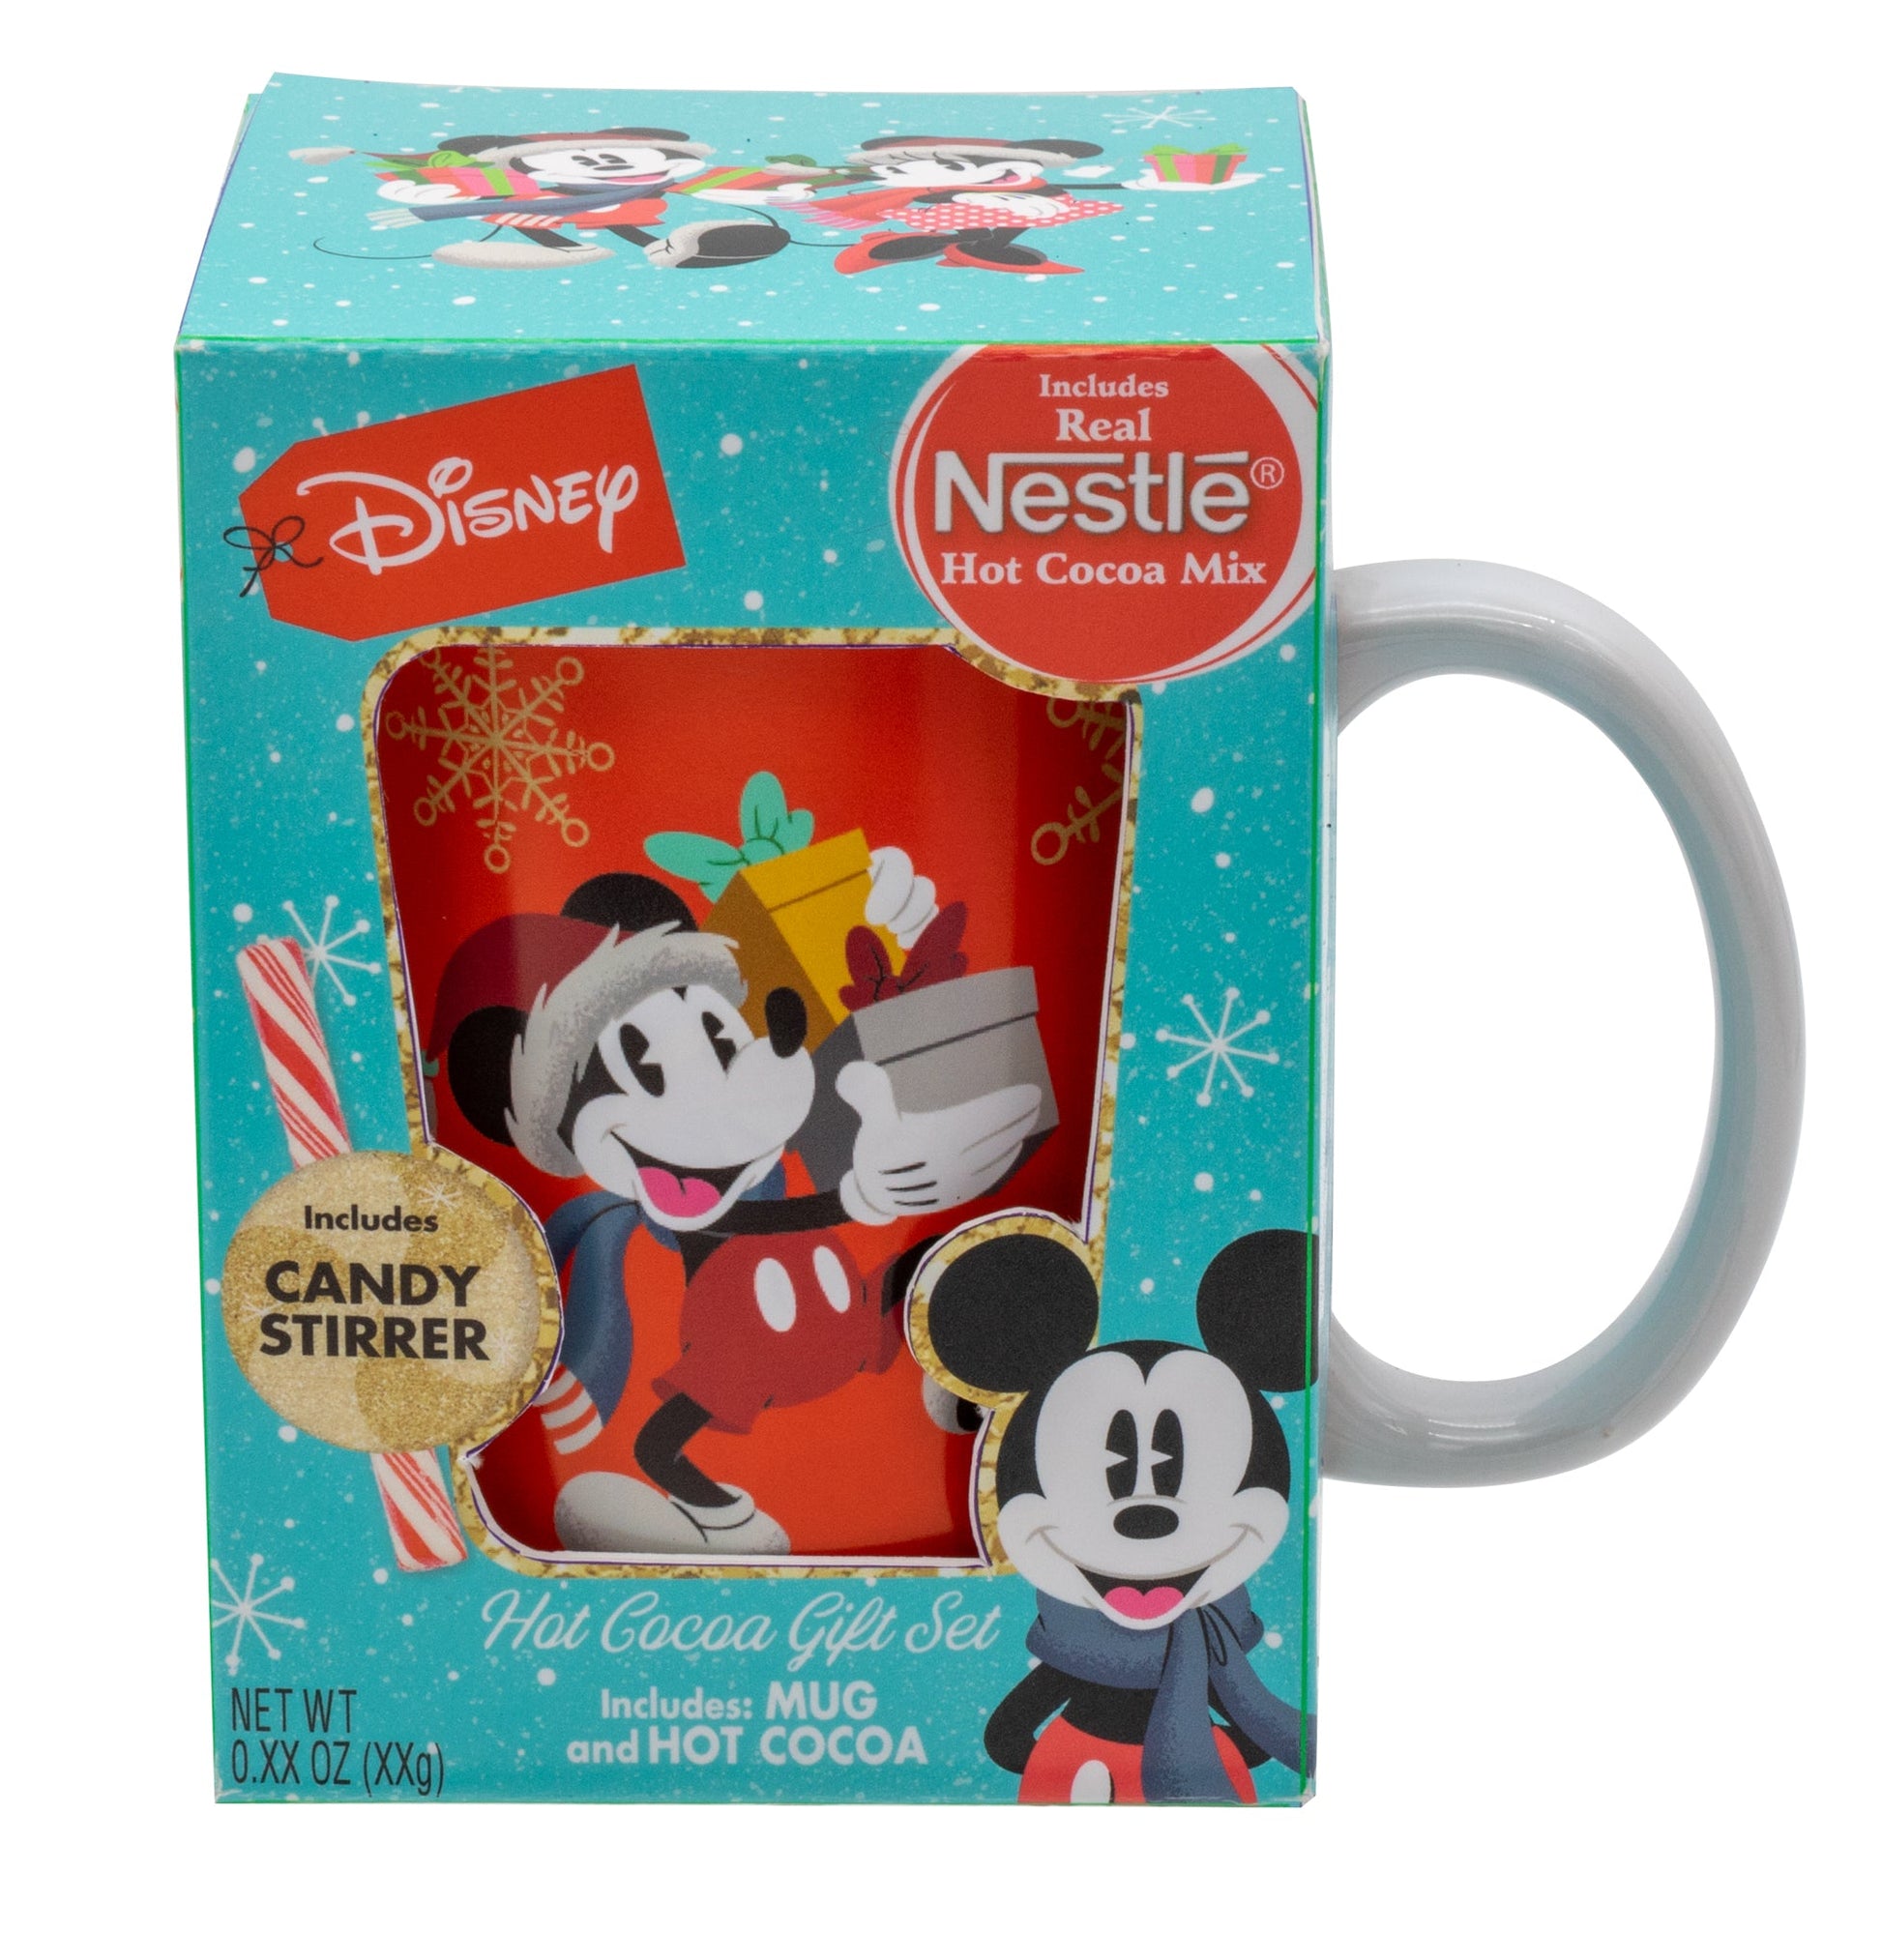 Blue Christmas themed box with red mug and mickey holding presents decal. White mug handle sticking out from right of box. 